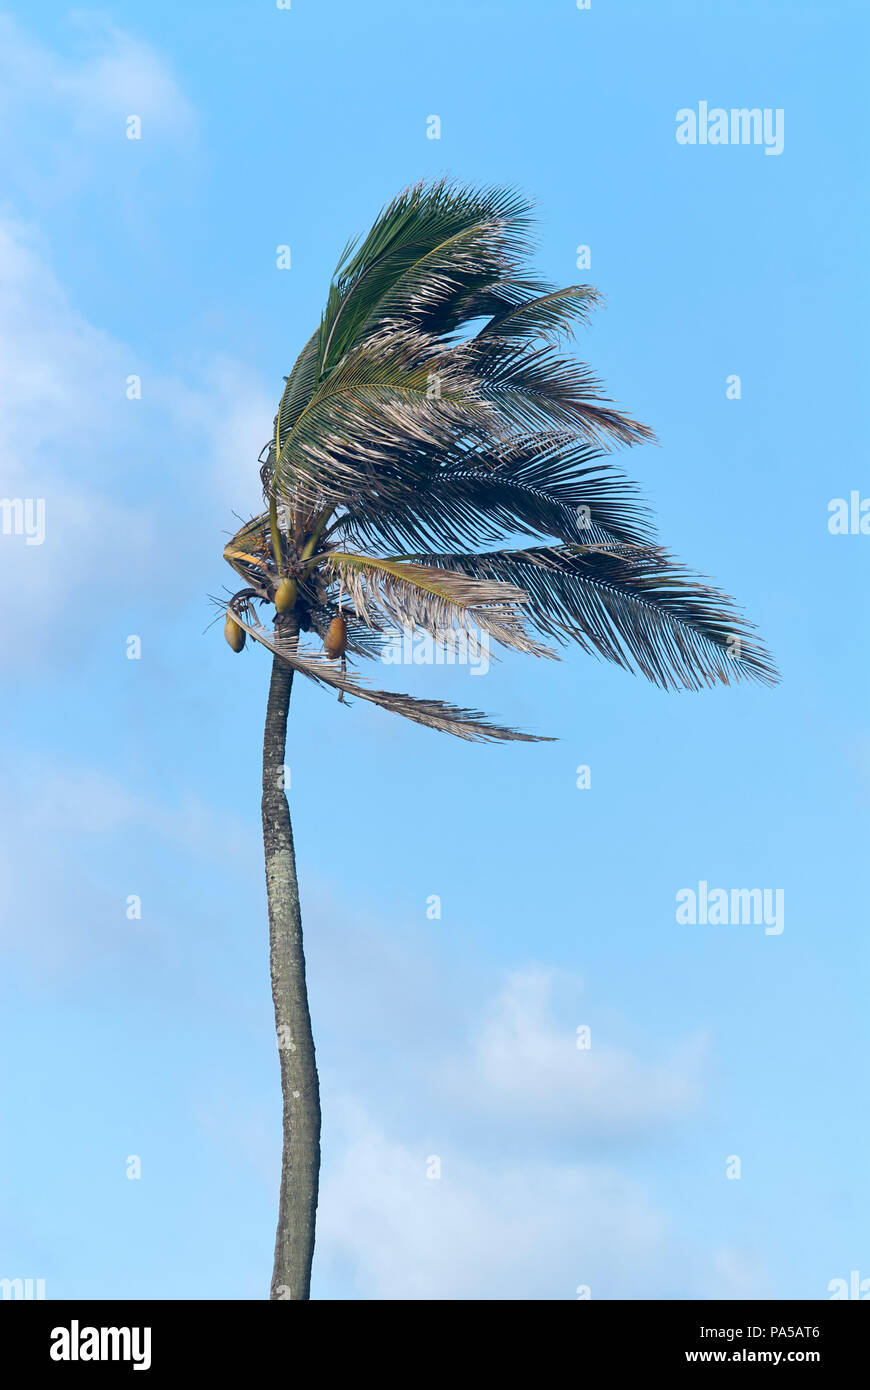 Coconut palm tree (Cocos nucifera) with leaves pointing in the direction of sea wind Stock Photo